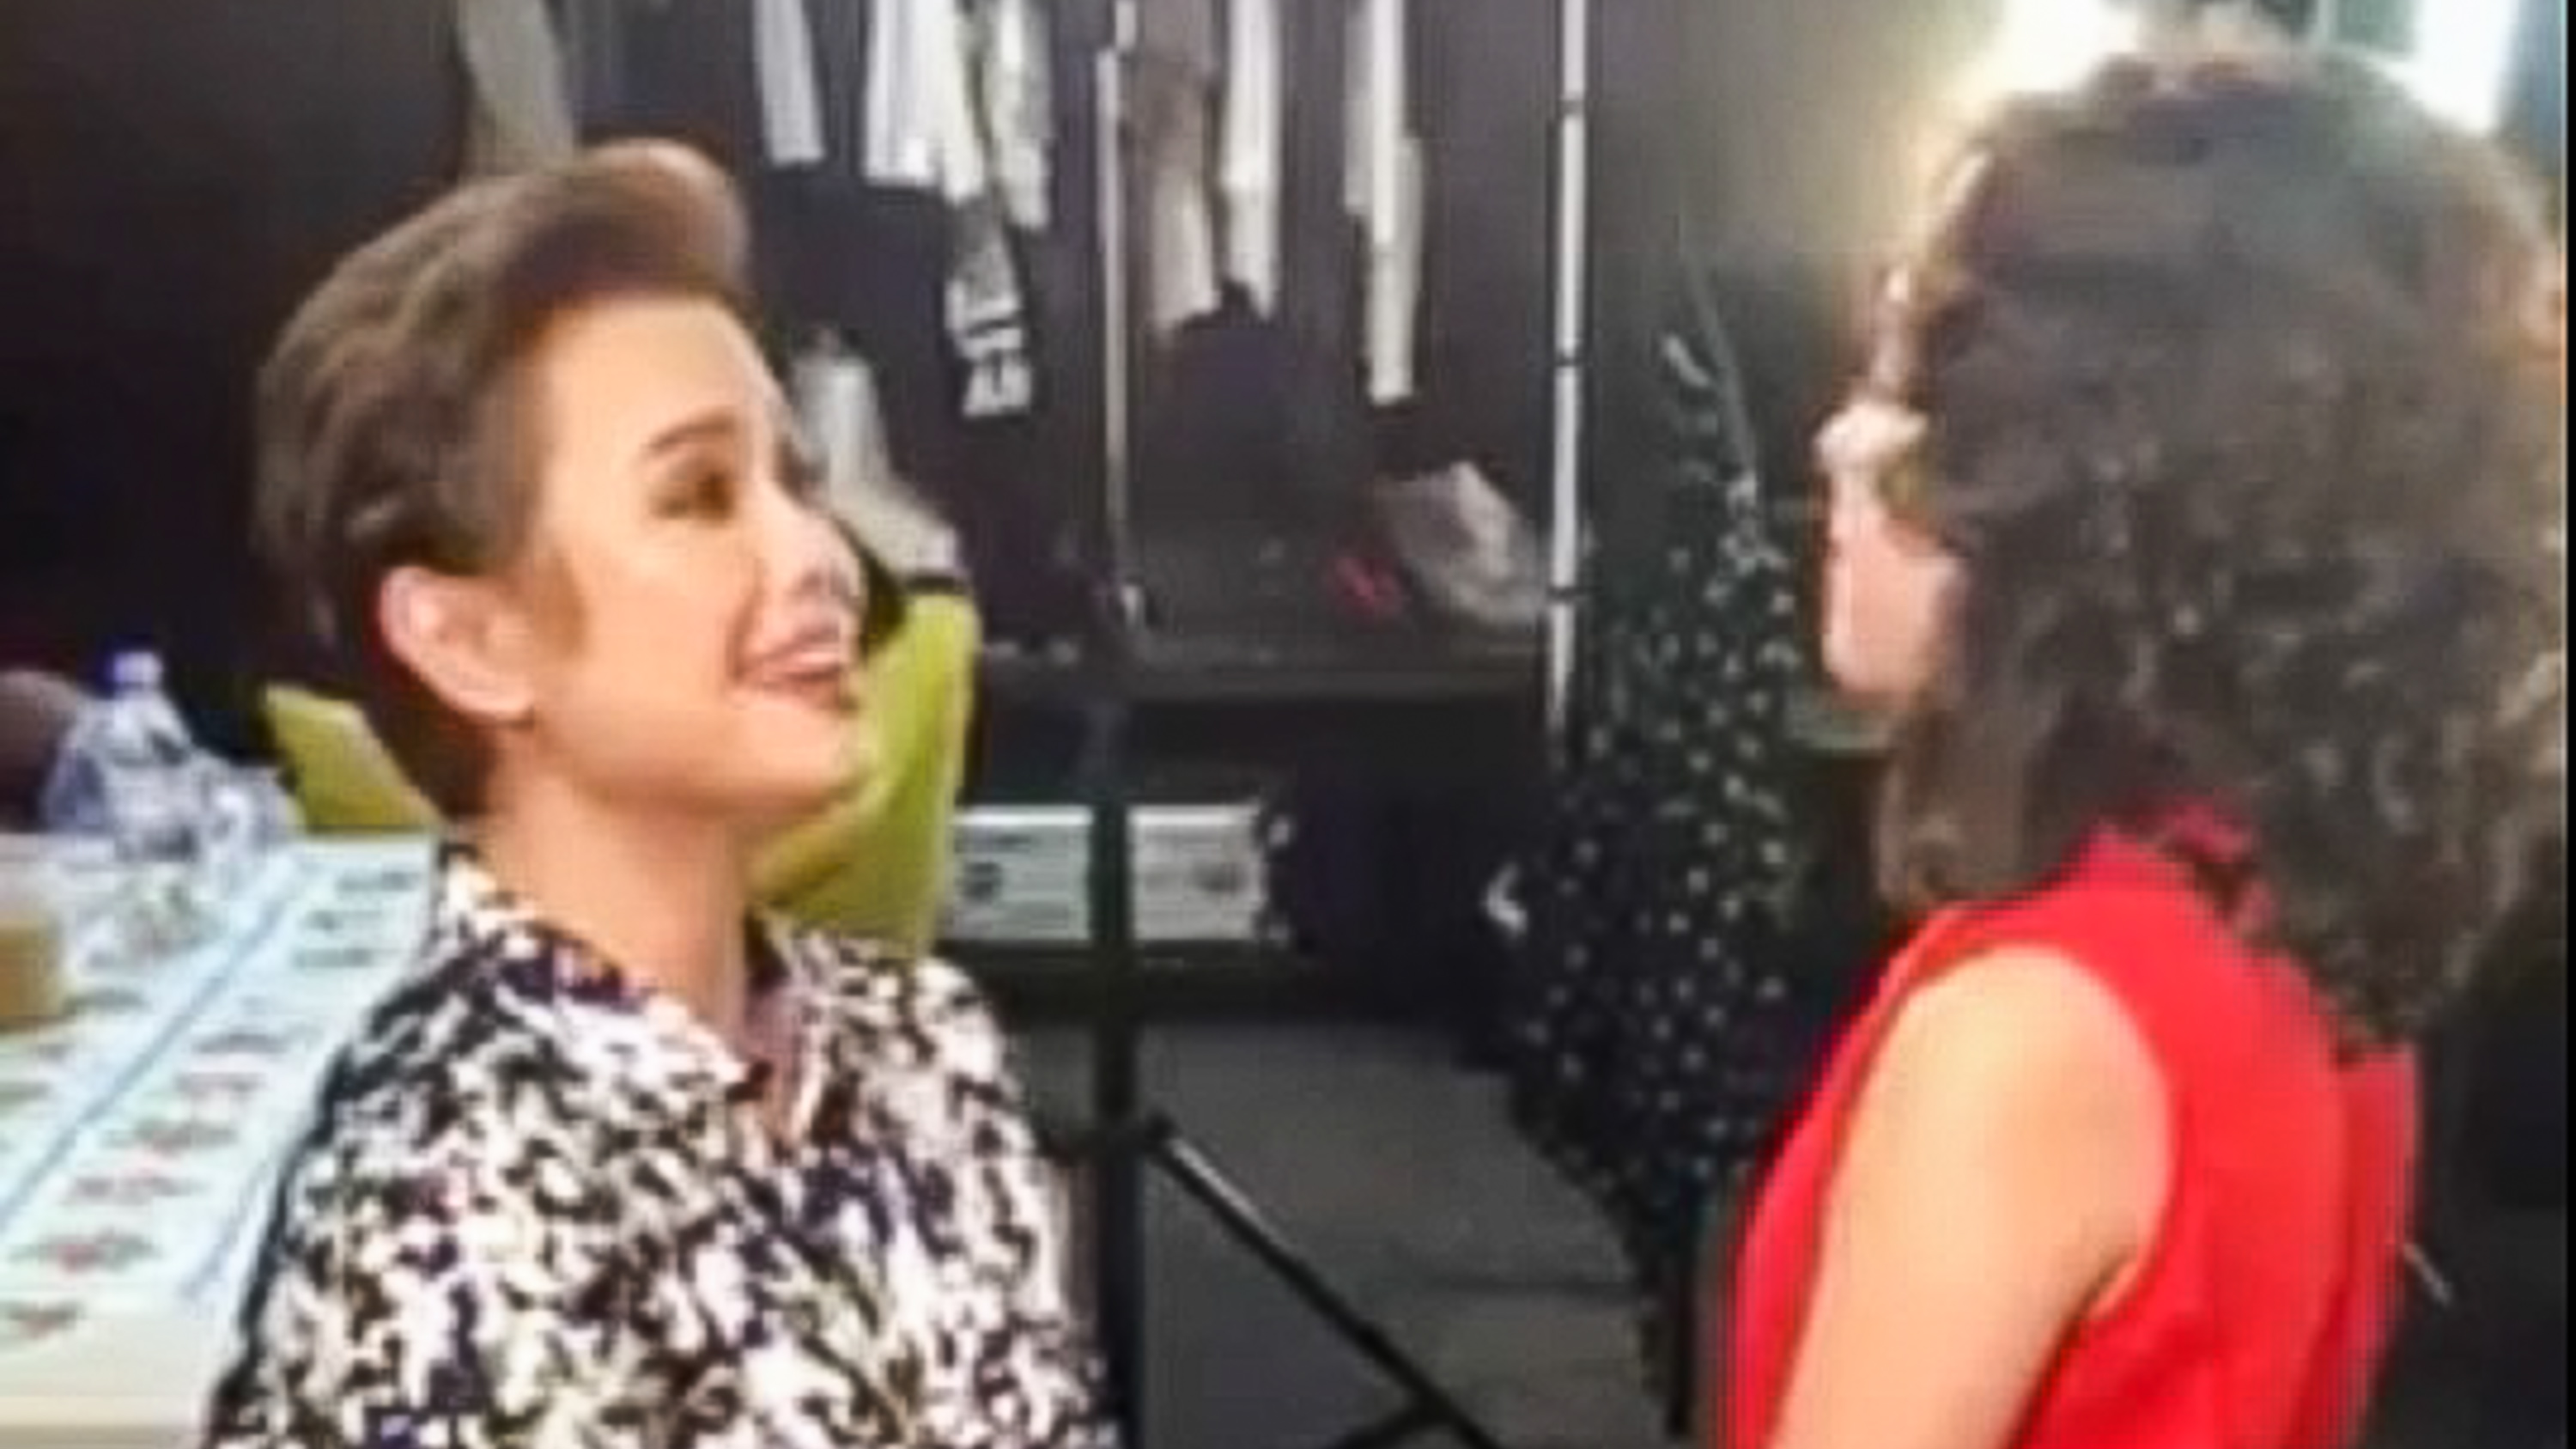 PAST AND PRESENT. Lea Salonga sings 'Maybe' from the musical 'Annie' with Krystal Brimner. Lea played the titular role in 1980, while Krystal is one of the actresses who will perform as Annie in the upcoming revival. Screengrab from YouTube/Girlie Rodis  